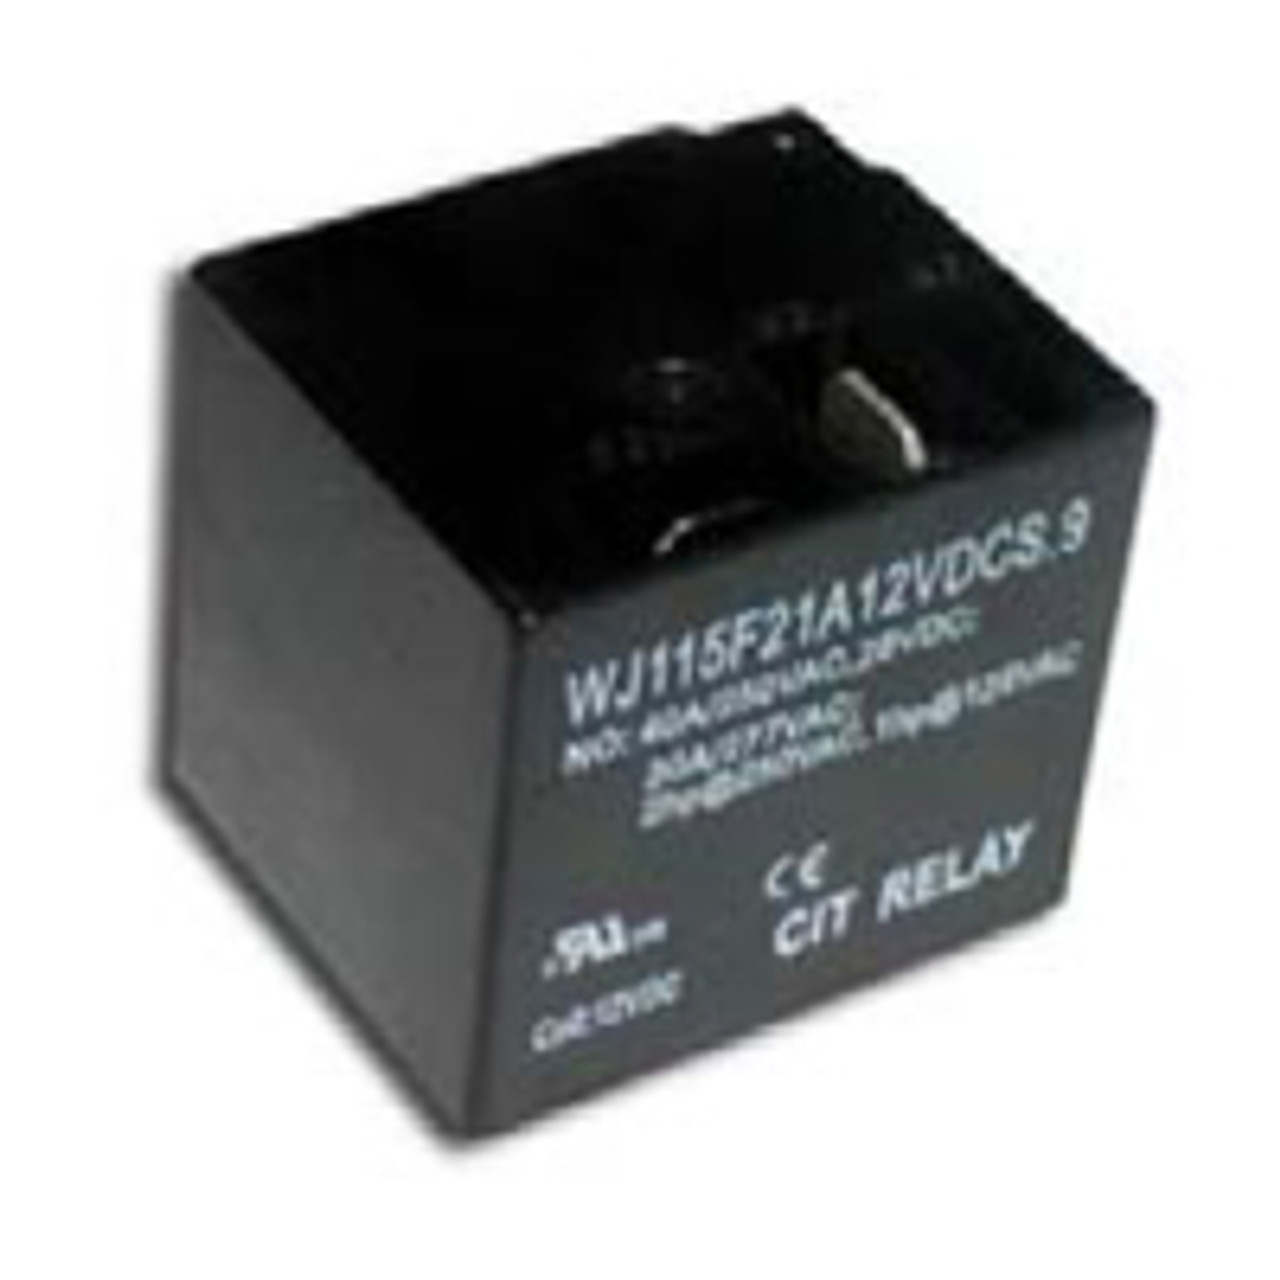 CIT Relay and Switch J115F21C24VDCN.9 Power Relays